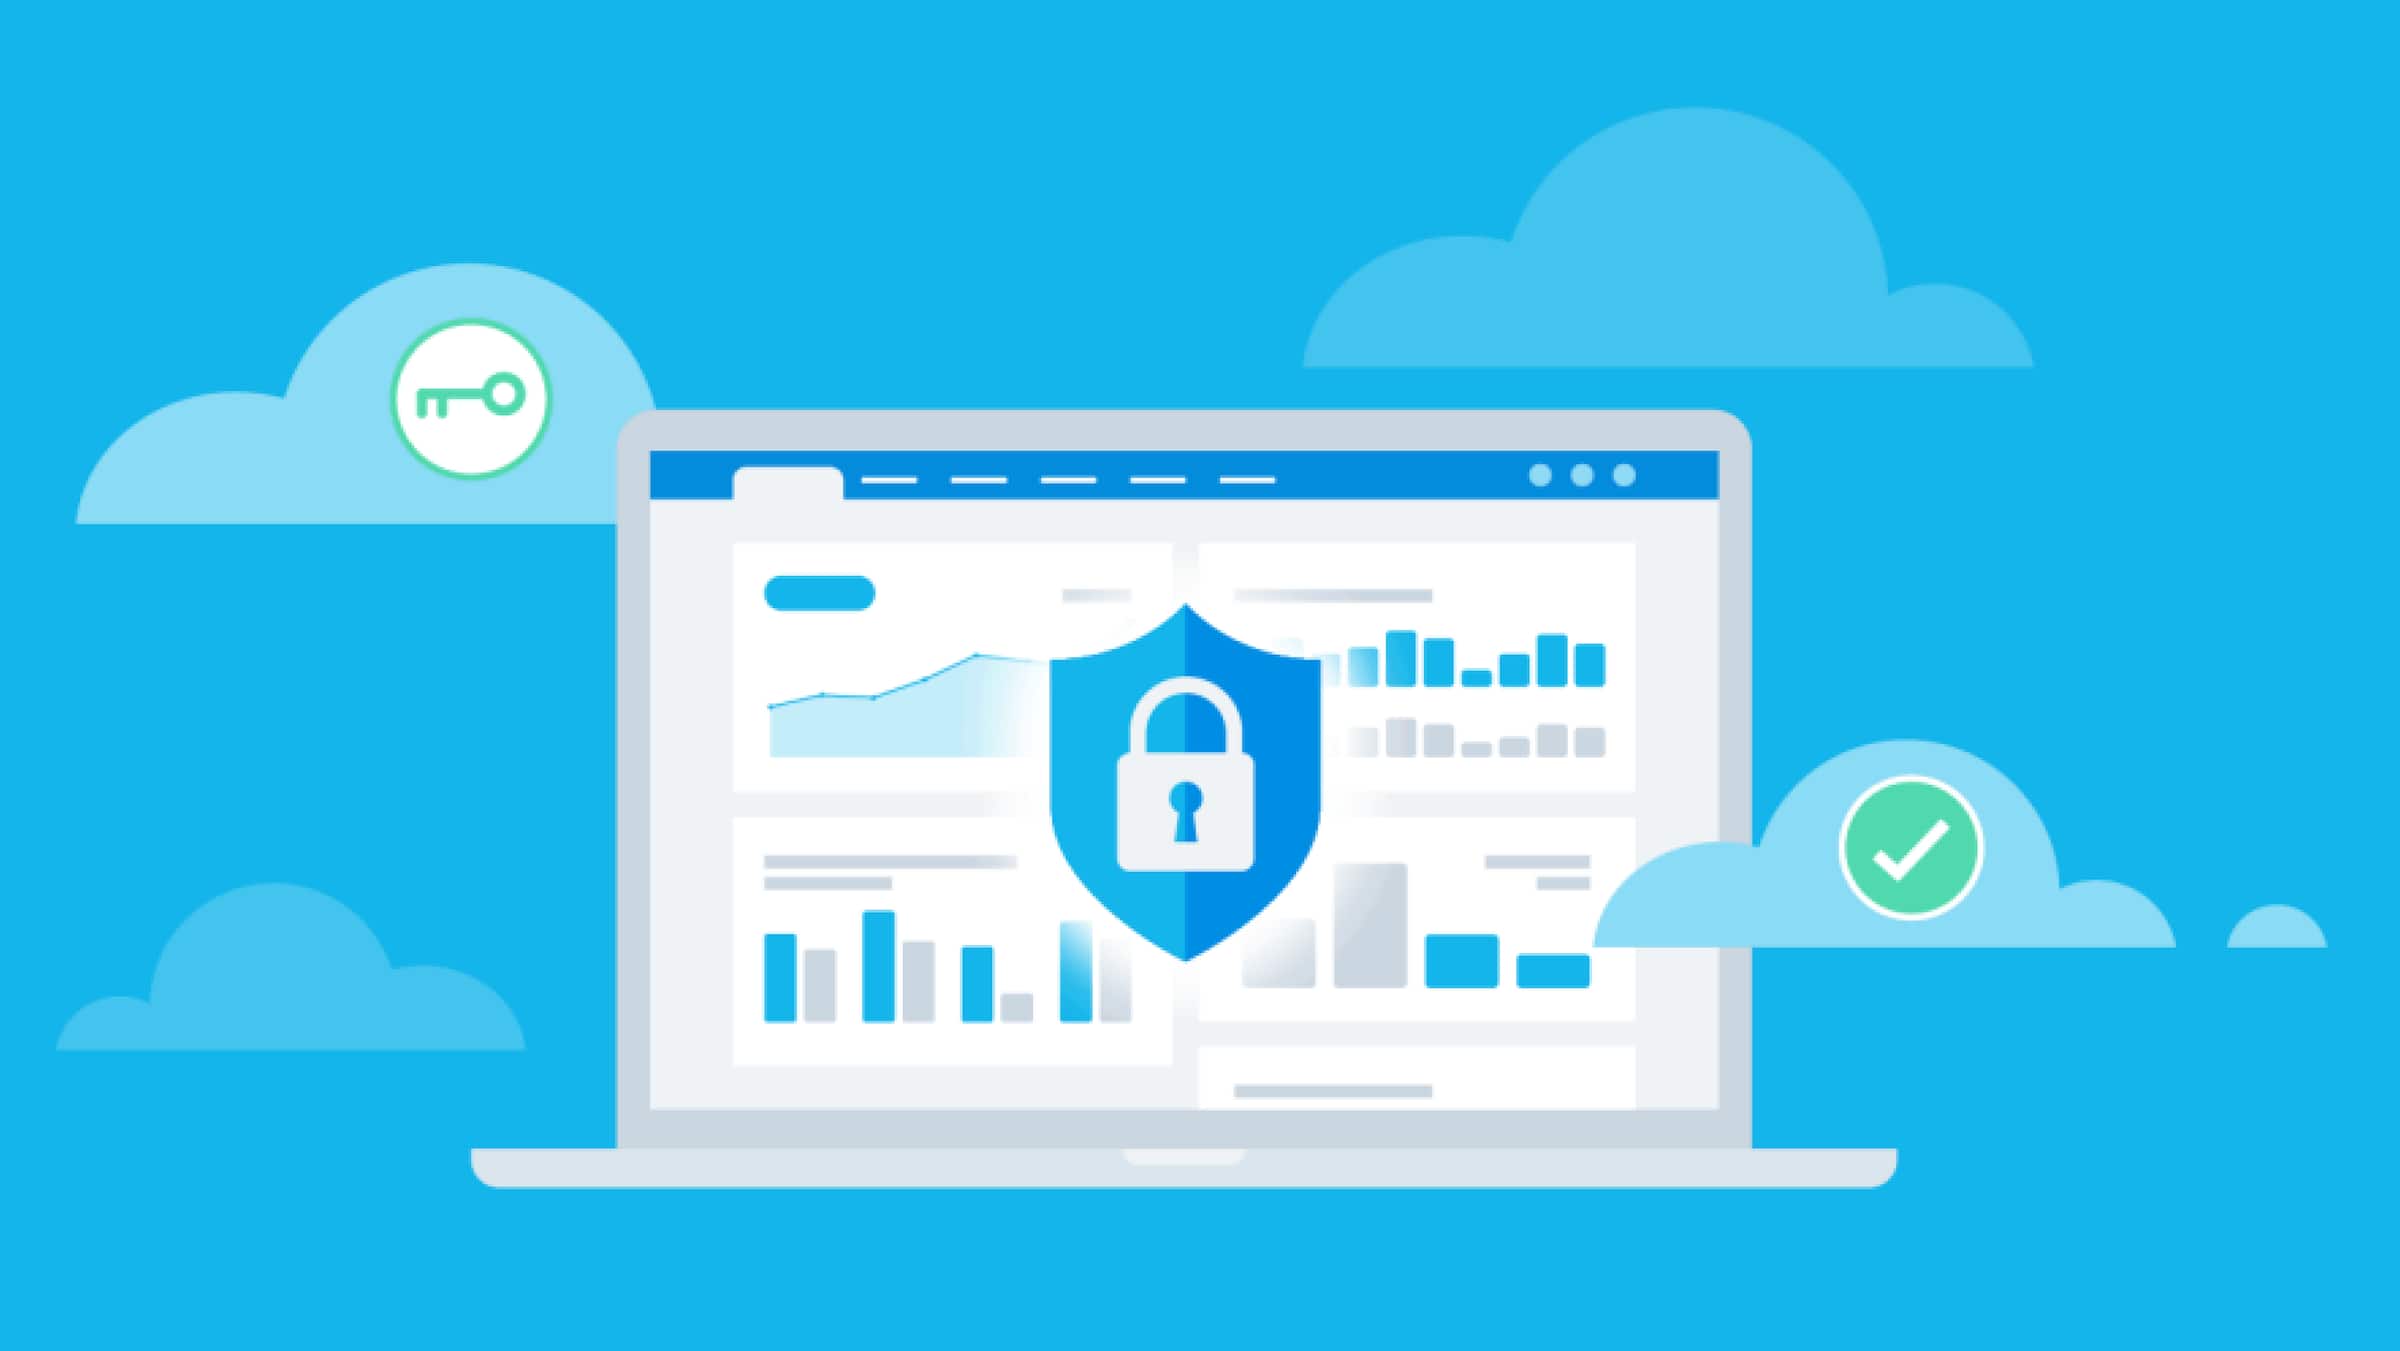 A padlock image overlays the Xero dashboard, signifying Xero’s commitment to keep data safe, secure and always available.